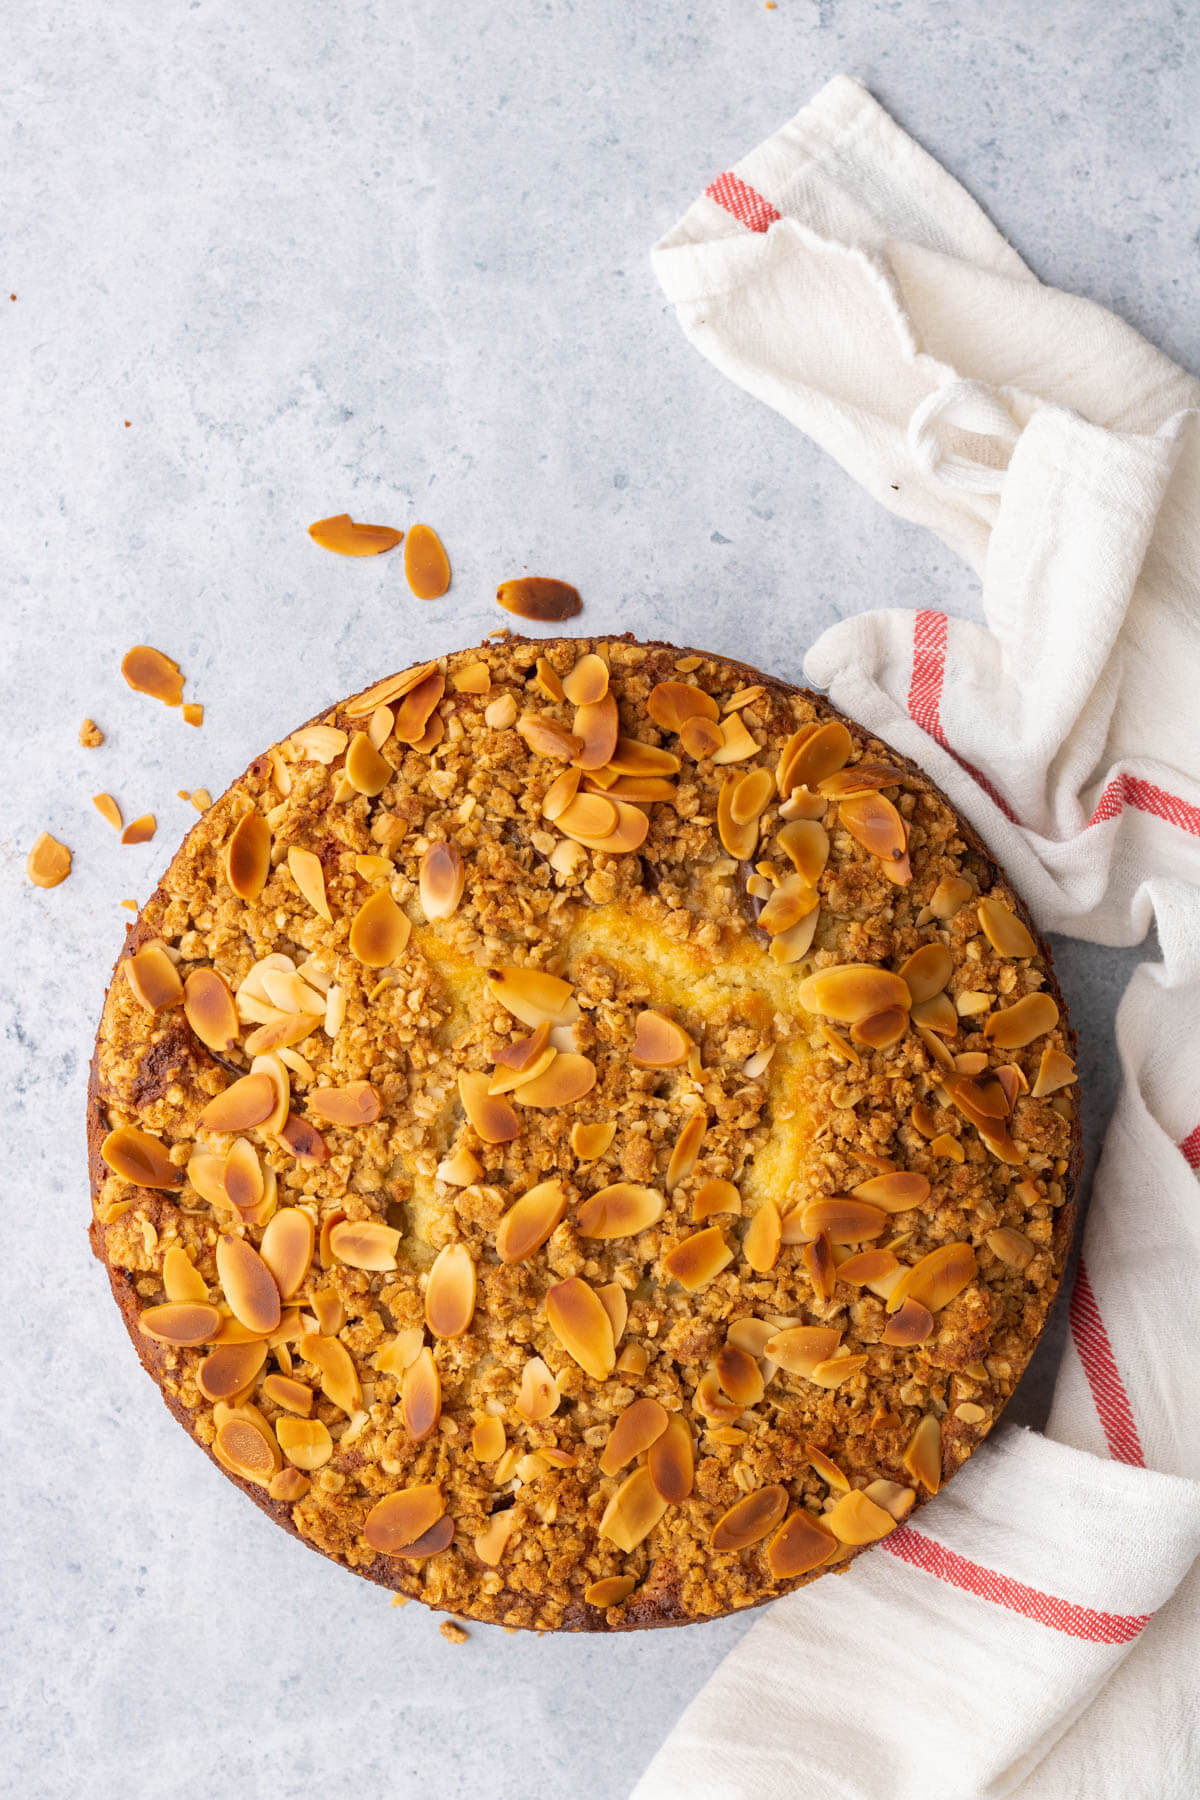 Overhead view of a golden almond crumble topped ricotta cake.